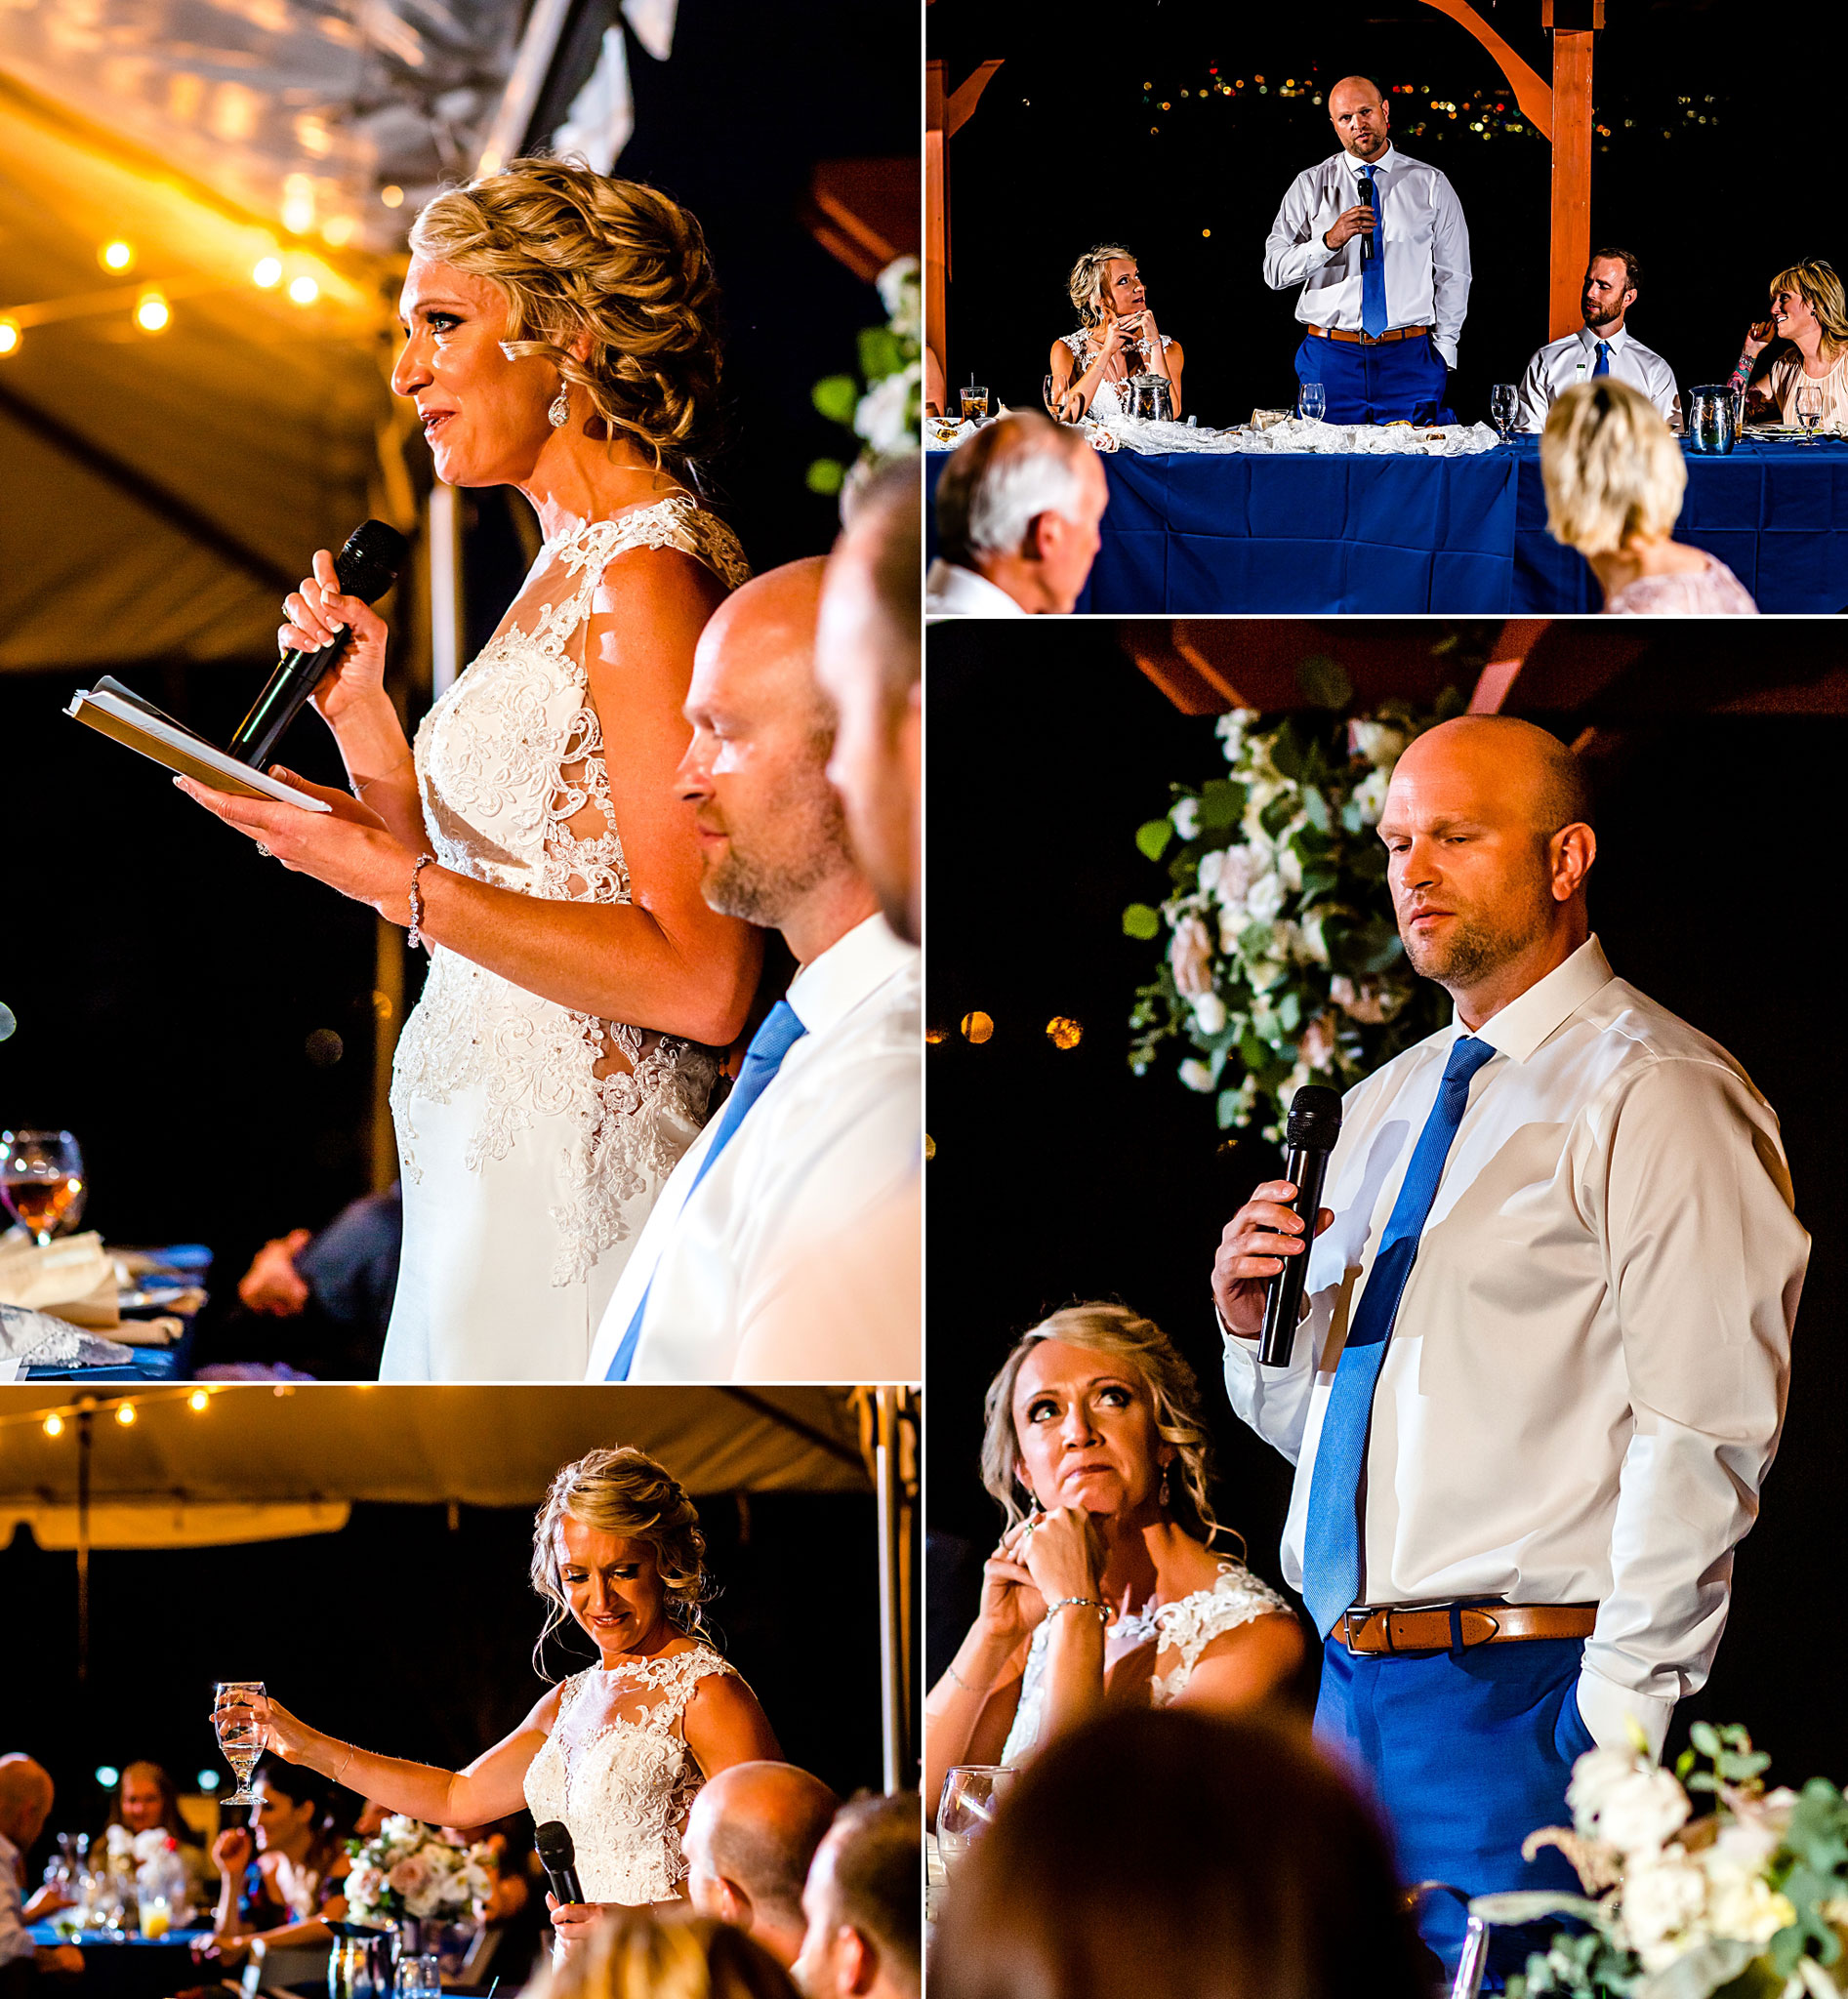 Bride and Groom thanking guests and family. Kelli & Jason's golf course wedding at The Ranch Country Club by Colorado Wedding Photographer Jennifer Garza, Small wedding ideas, Intimate wedding, Golf Course Wedding, Country Club Wedding, Summer Wedding, Golf Wedding, Wedding planning, Colorado Wedding Photographer, Colorado Elopement Photographer, Colorado Elopement, Colorado Wedding, Denver Wedding Photographer, Denver Wedding, Wedding Inspiration, Summer Wedding Inspiration, Covid Wedding